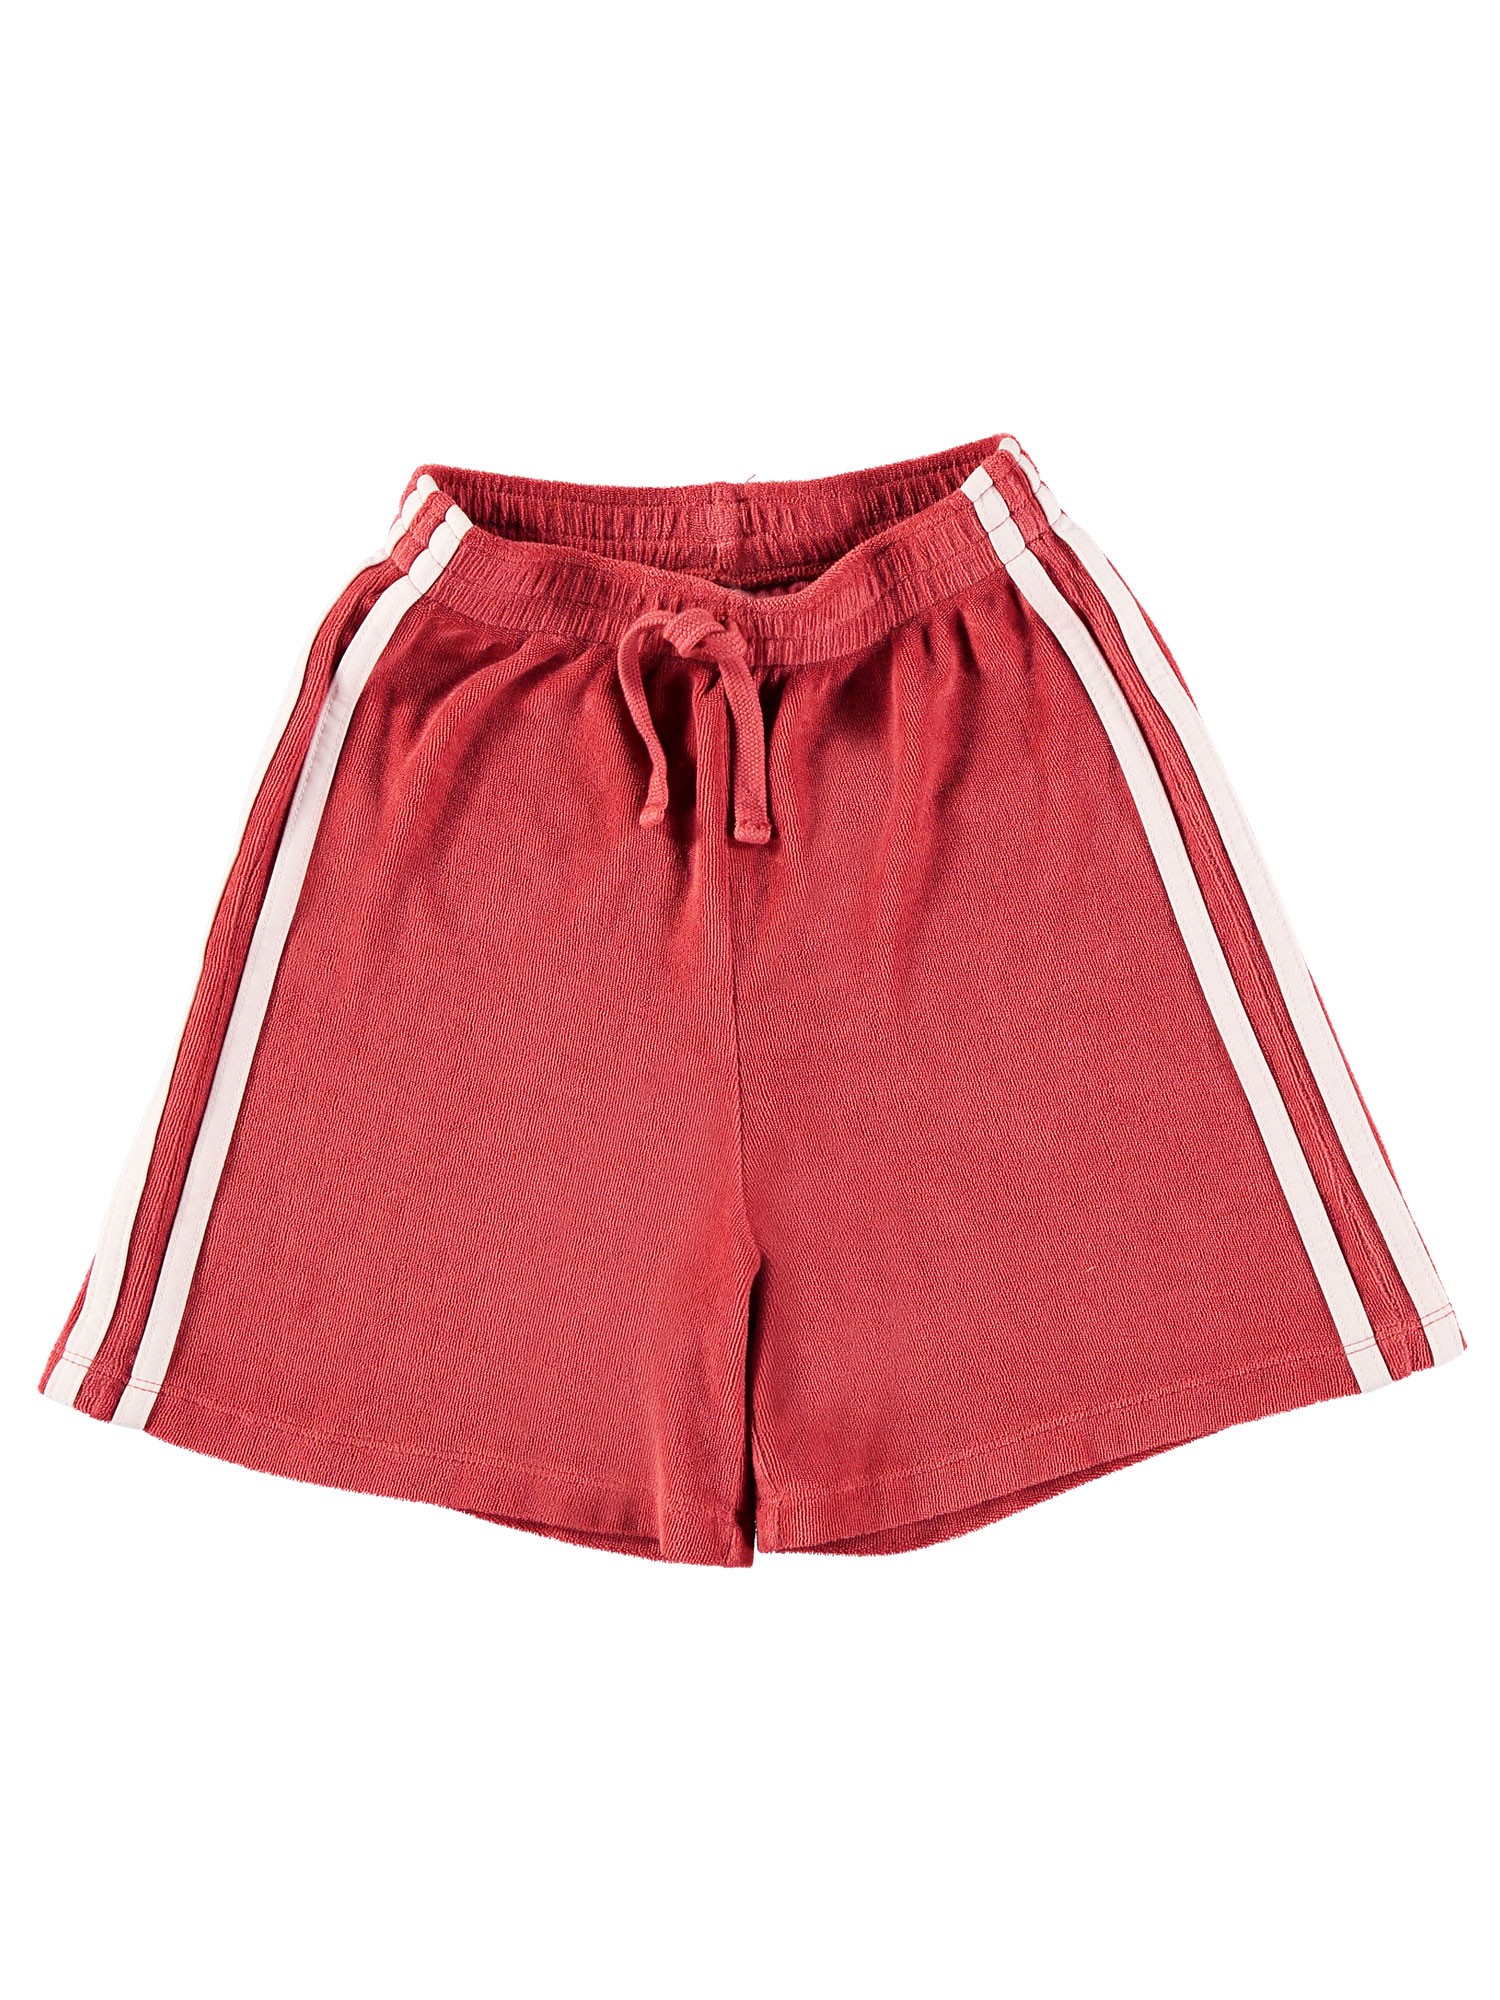 TERRY SHORTS WITH SIDE STRIPES 5